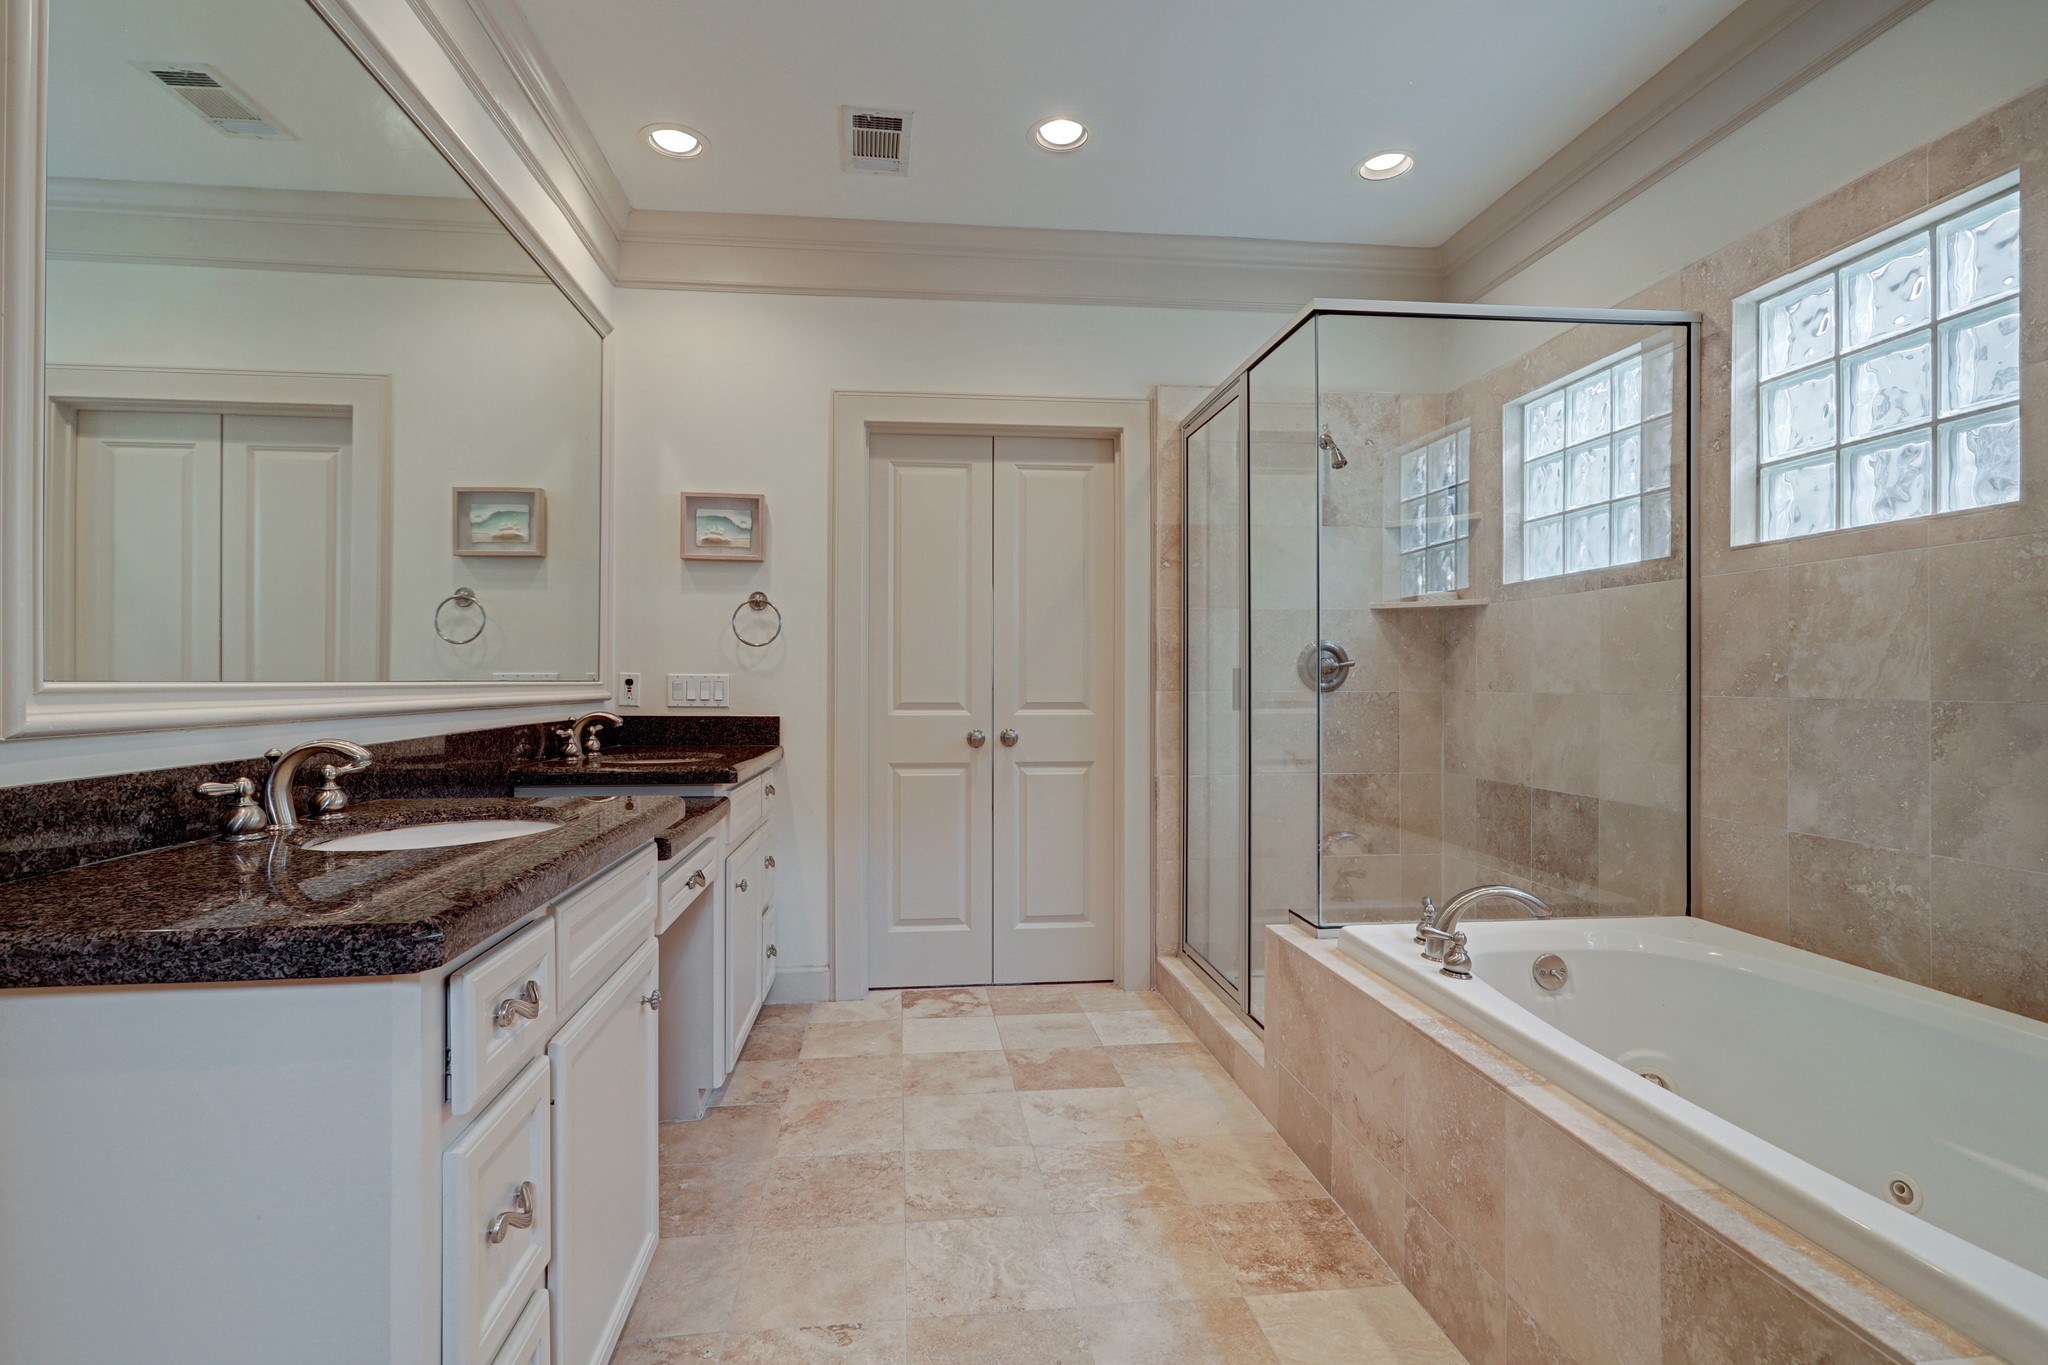 Large primary bathroom has a separate shower and jetted tub, marble floors and counters